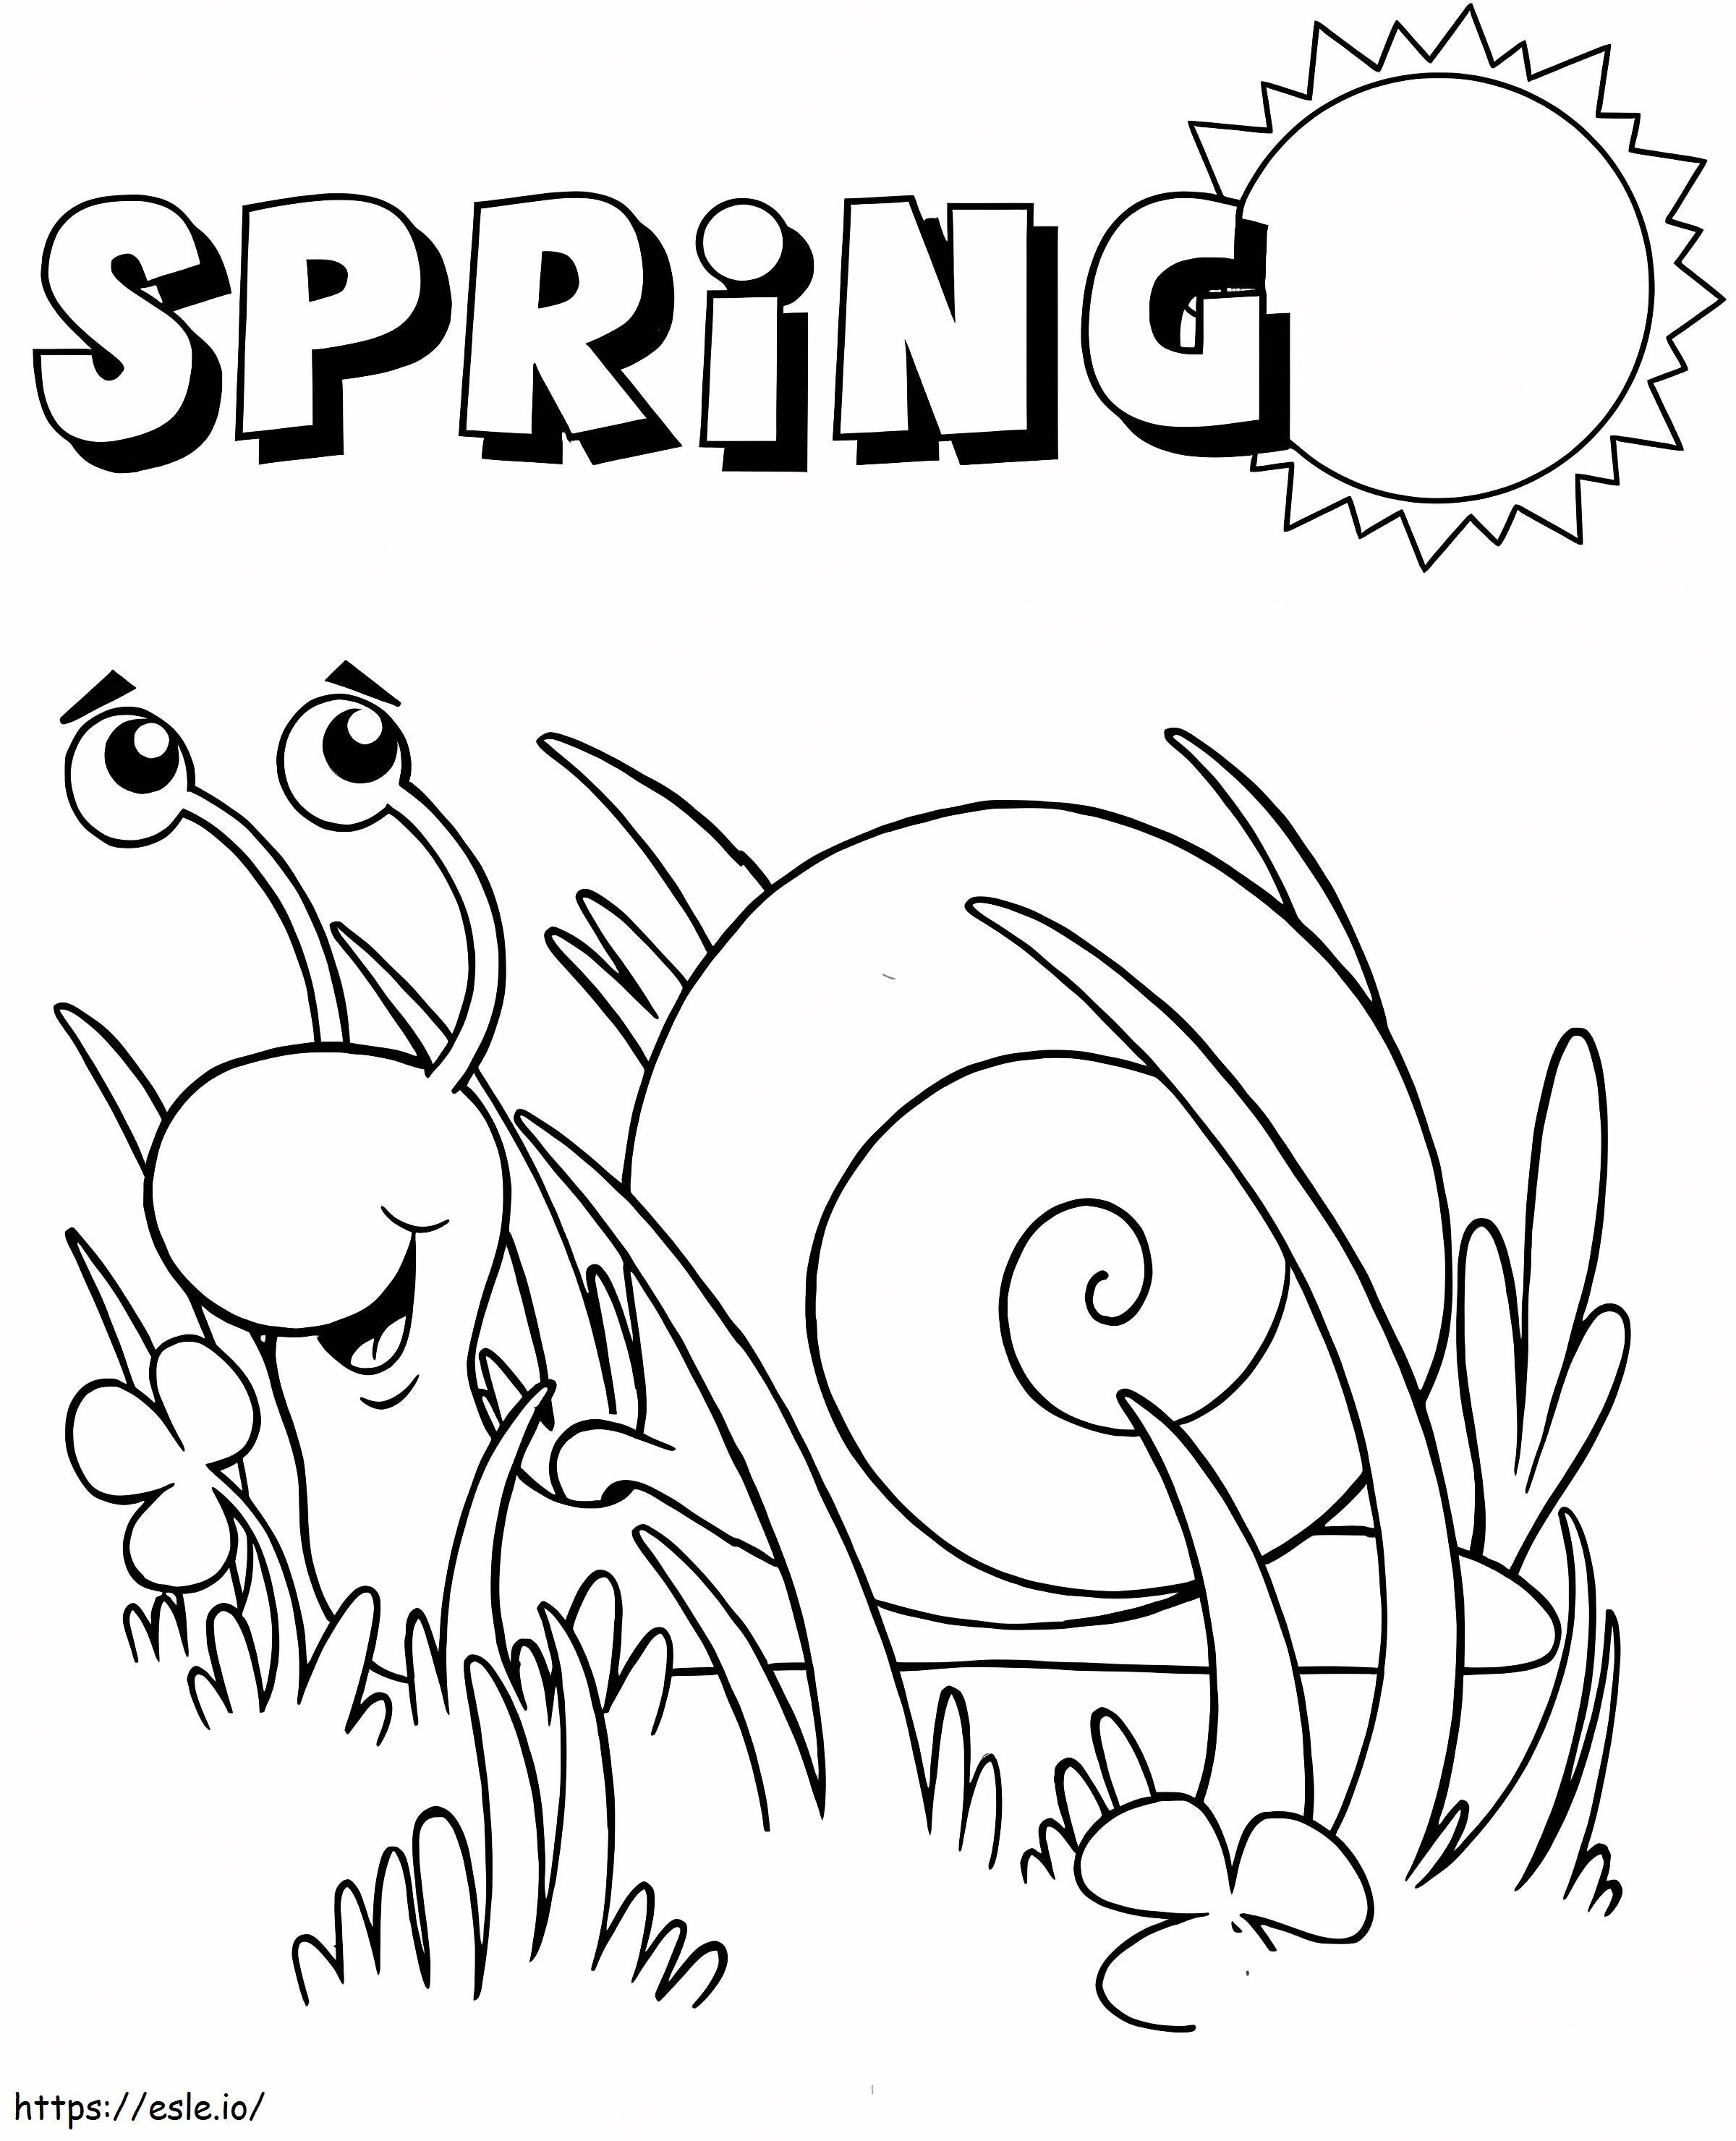 Spring Snail Sun coloring page